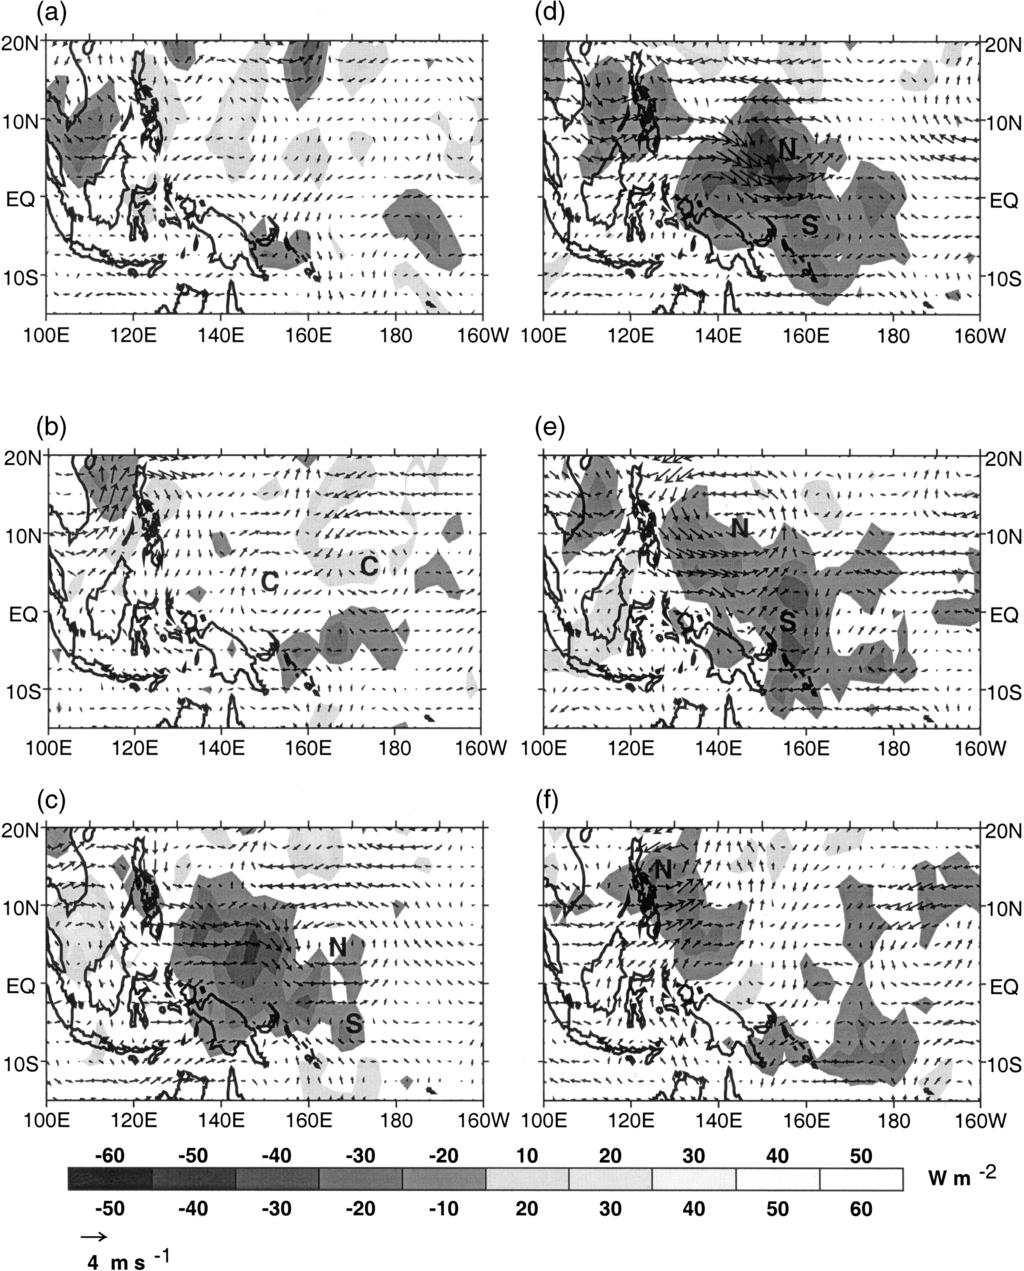 2934 JOURNAL OF CLIMATE VOLUME 14 FIG. 7. Aug Oct 1 100-day filtered 850-mb wind and OLR anomalies. Contours as in Fig. 6.